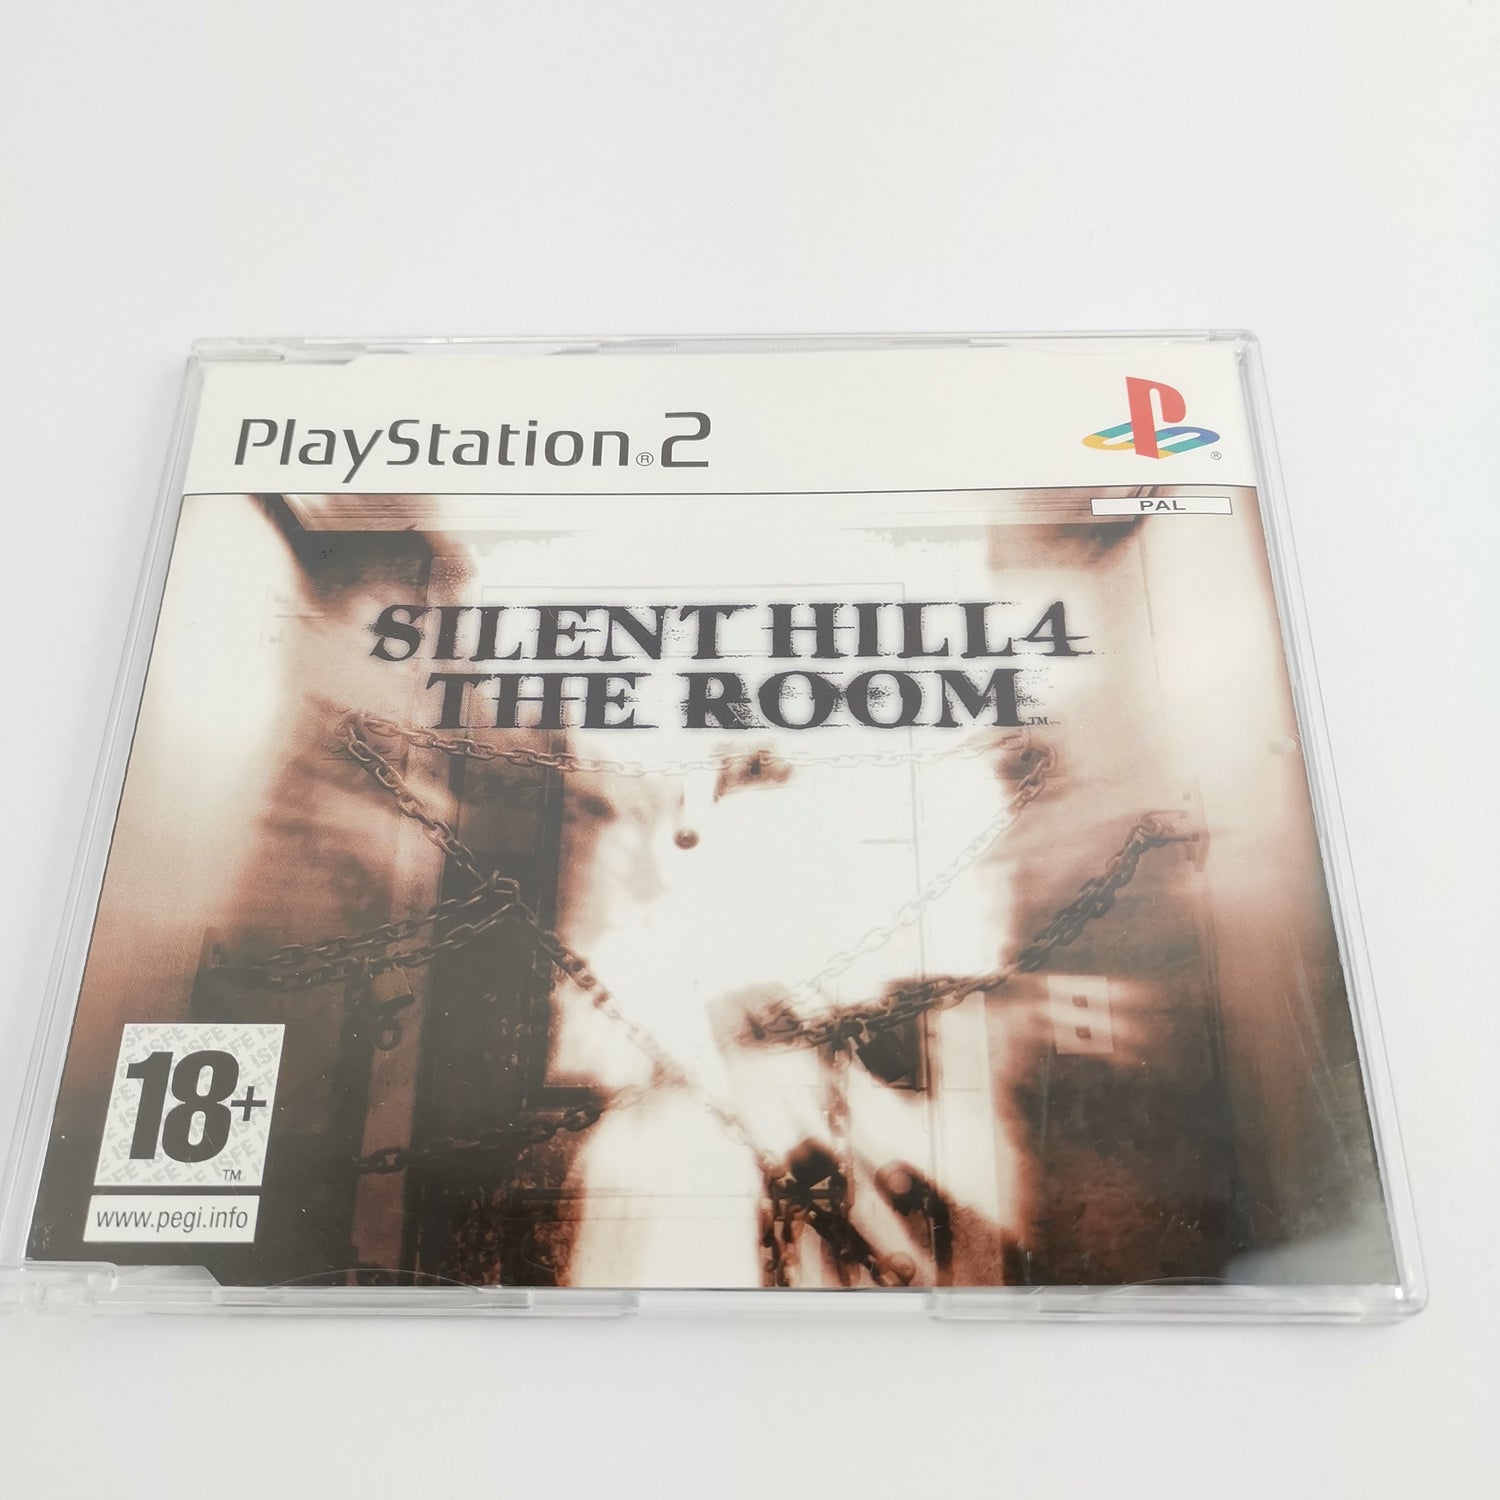 Sony Playstation 2 Promo Game: Silent Hill 4 The Room - USK18 | PS2 OVP PAL